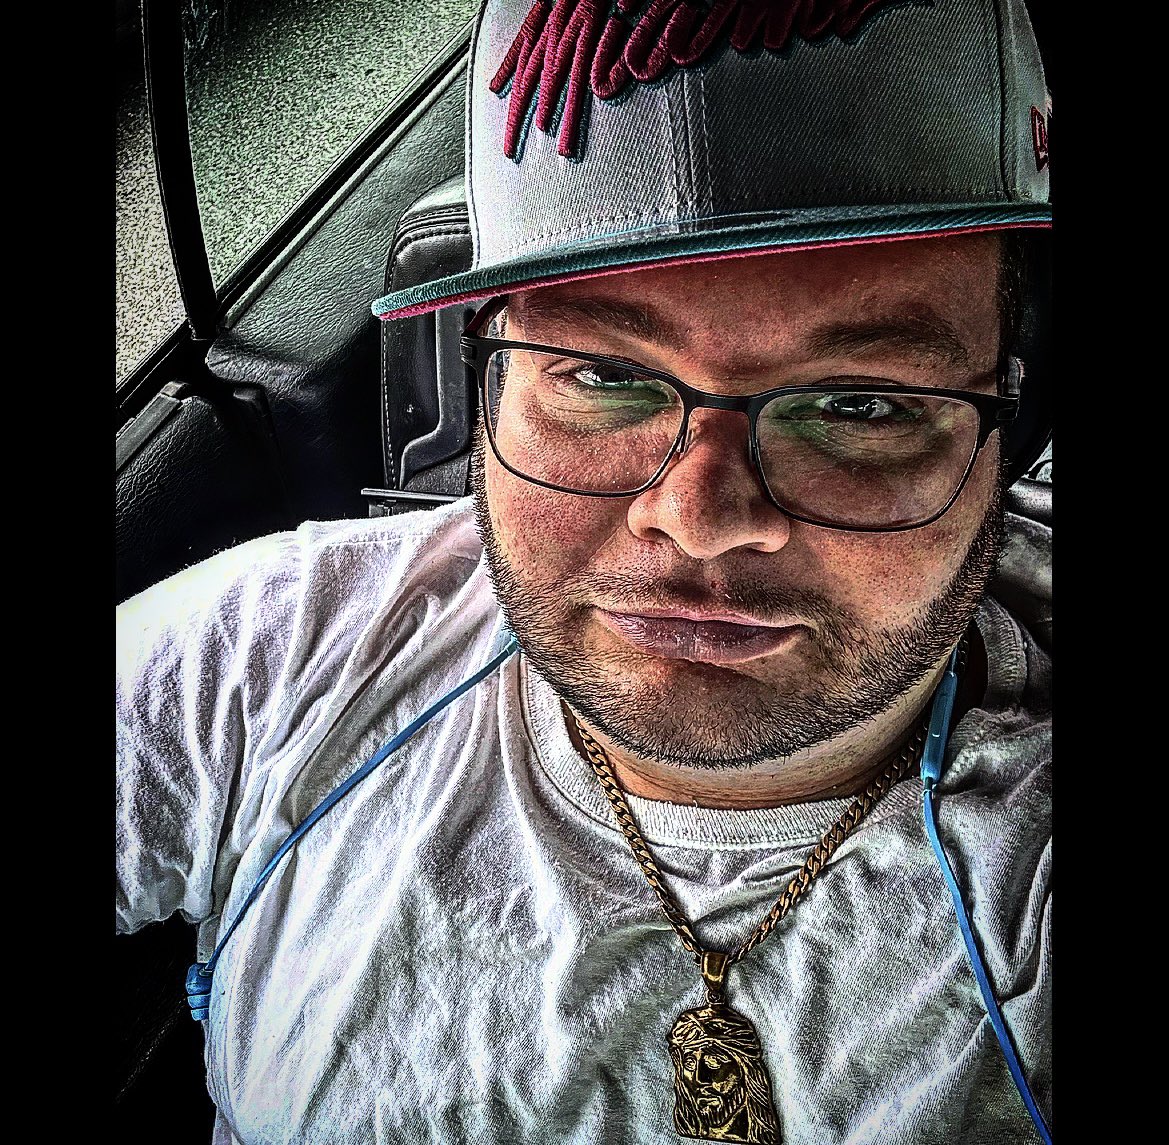 For thinking you can come with that pac man
This ain't a game boy
As I run the block like Tetris making rounds on that paper boy ~Shawndahitmaker~

#fatboyfresh #ontheblock #trap #hustling #paperchasing #inthecarselfie #inthecar #listentomusic #outside #selfie #ugly #dressedup